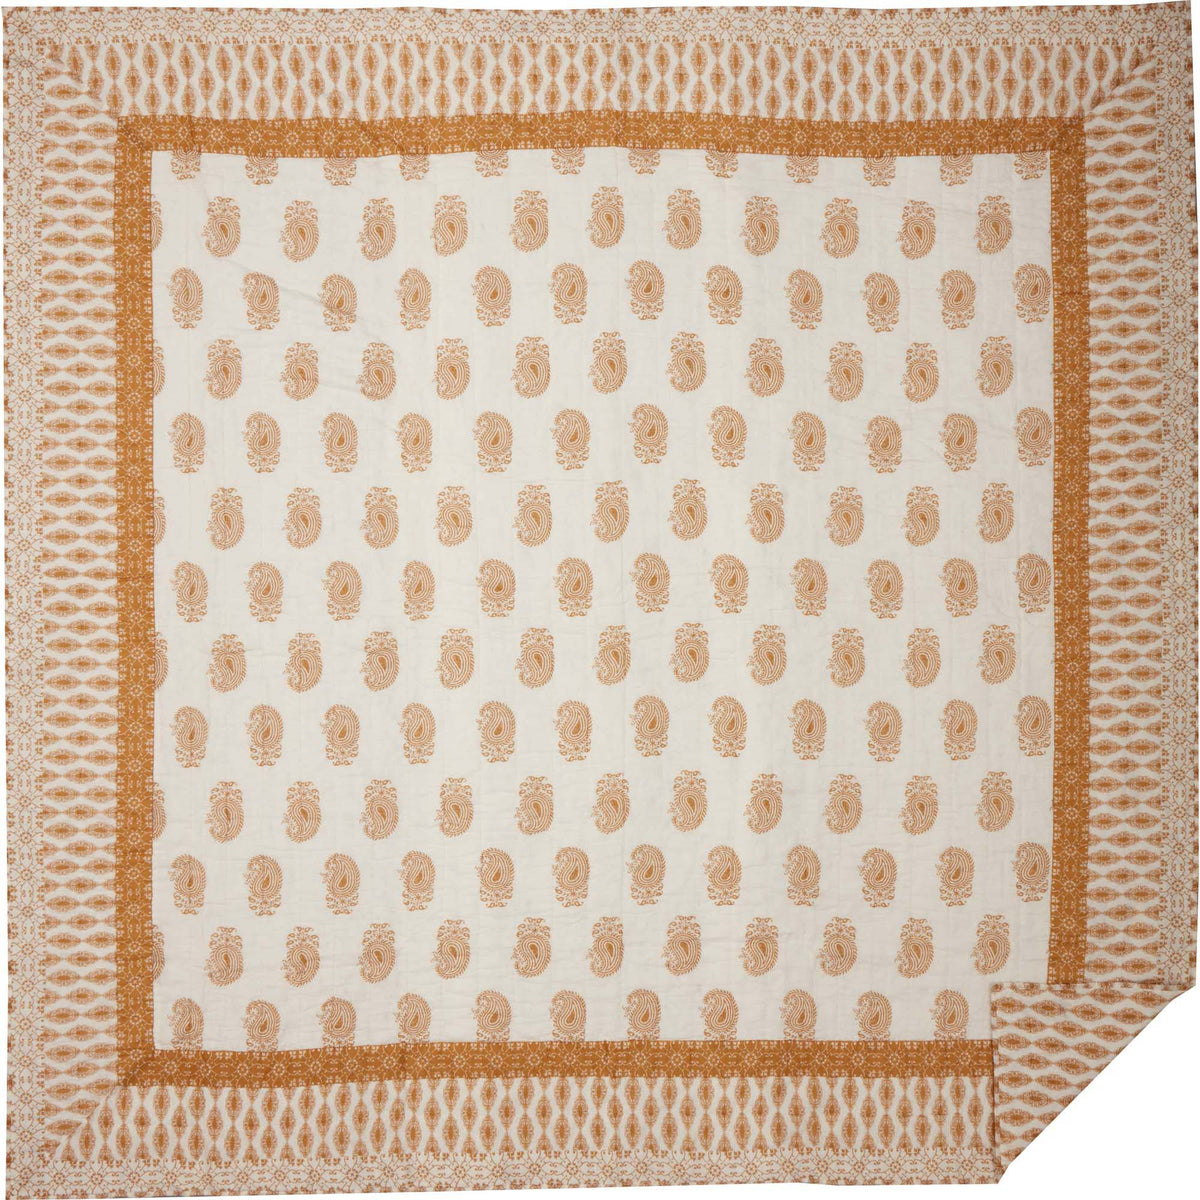 April & Olive Avani Gold Queen Quilt 90Wx90L By VHC Brands